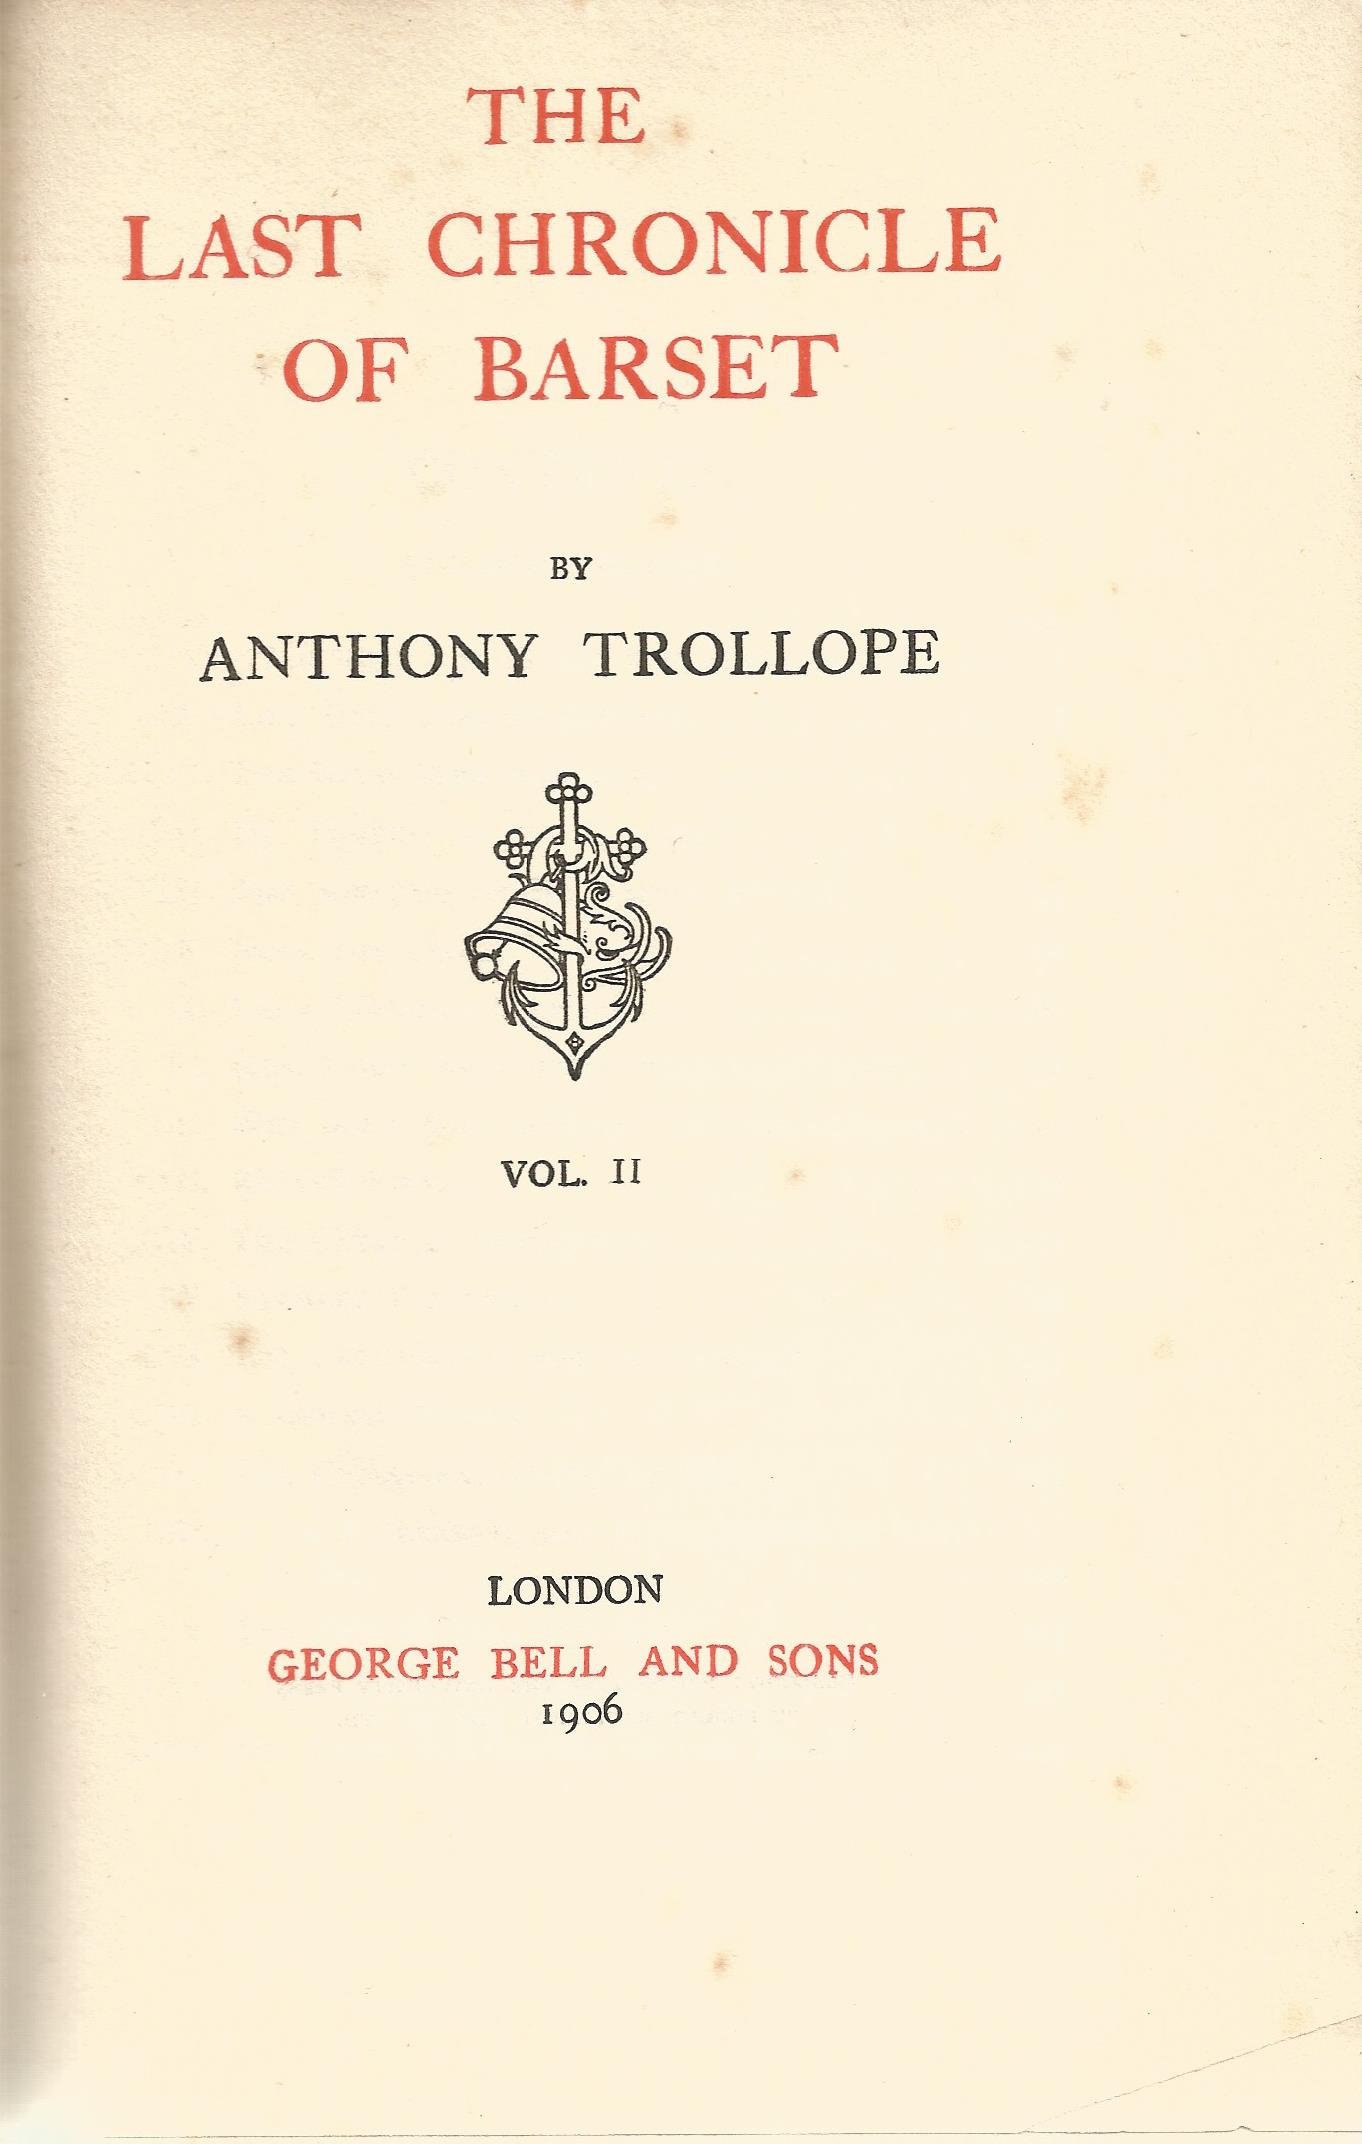 The Last Chronicle of Barset by Anthony Trollope Vol II Hardback Book 1906 published by George - Image 2 of 2